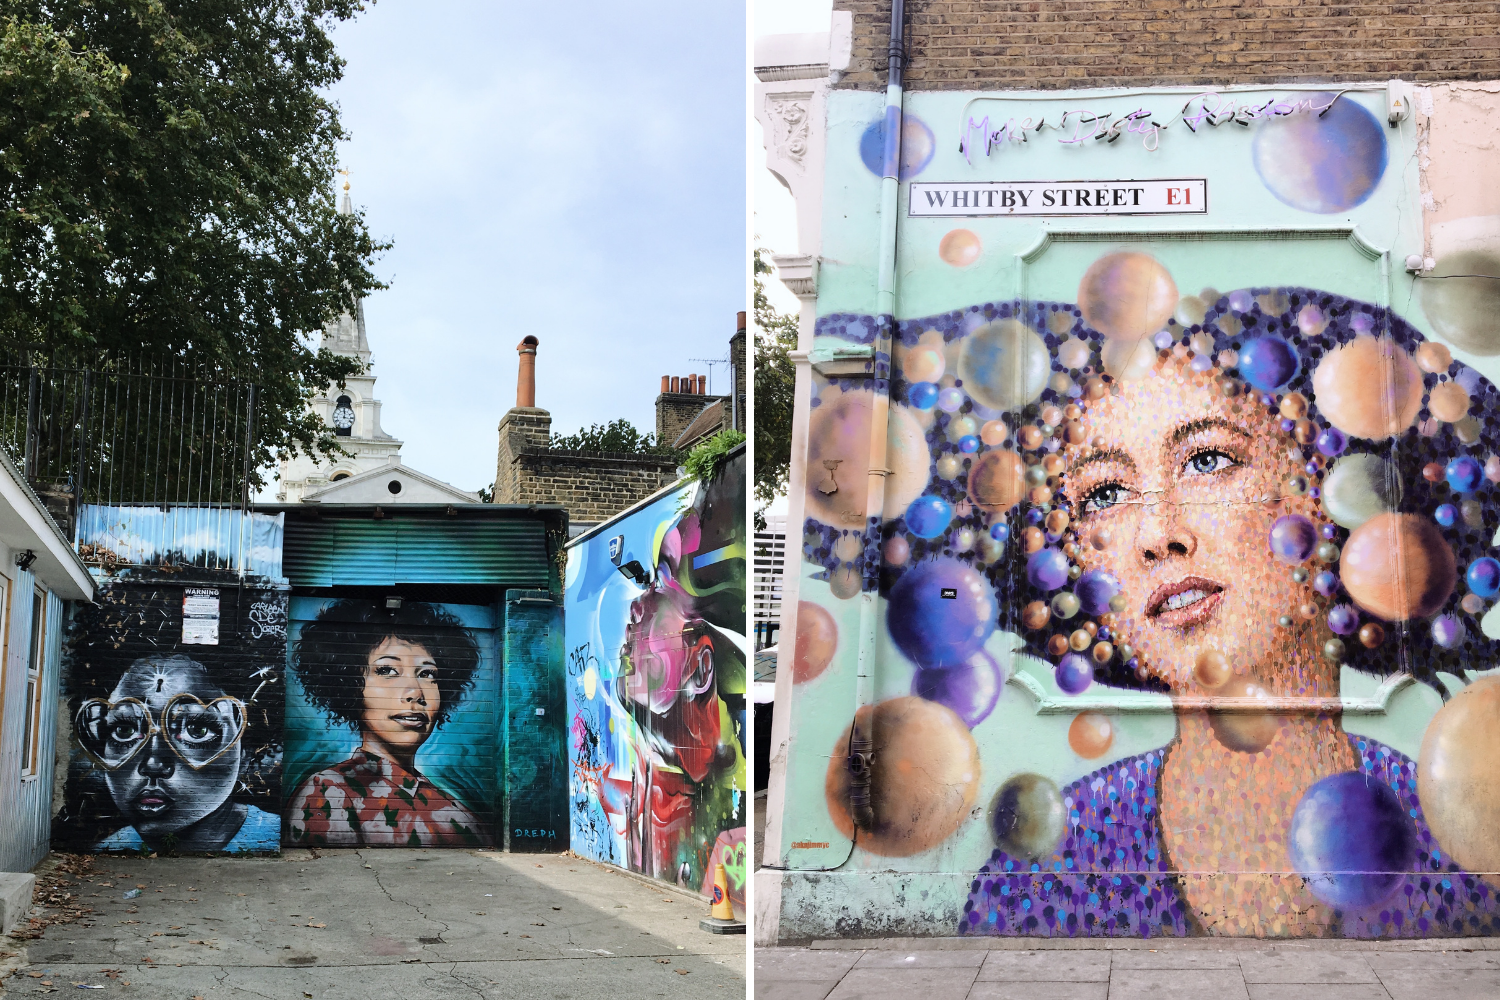 London is certainly one of the best street art cities in the world